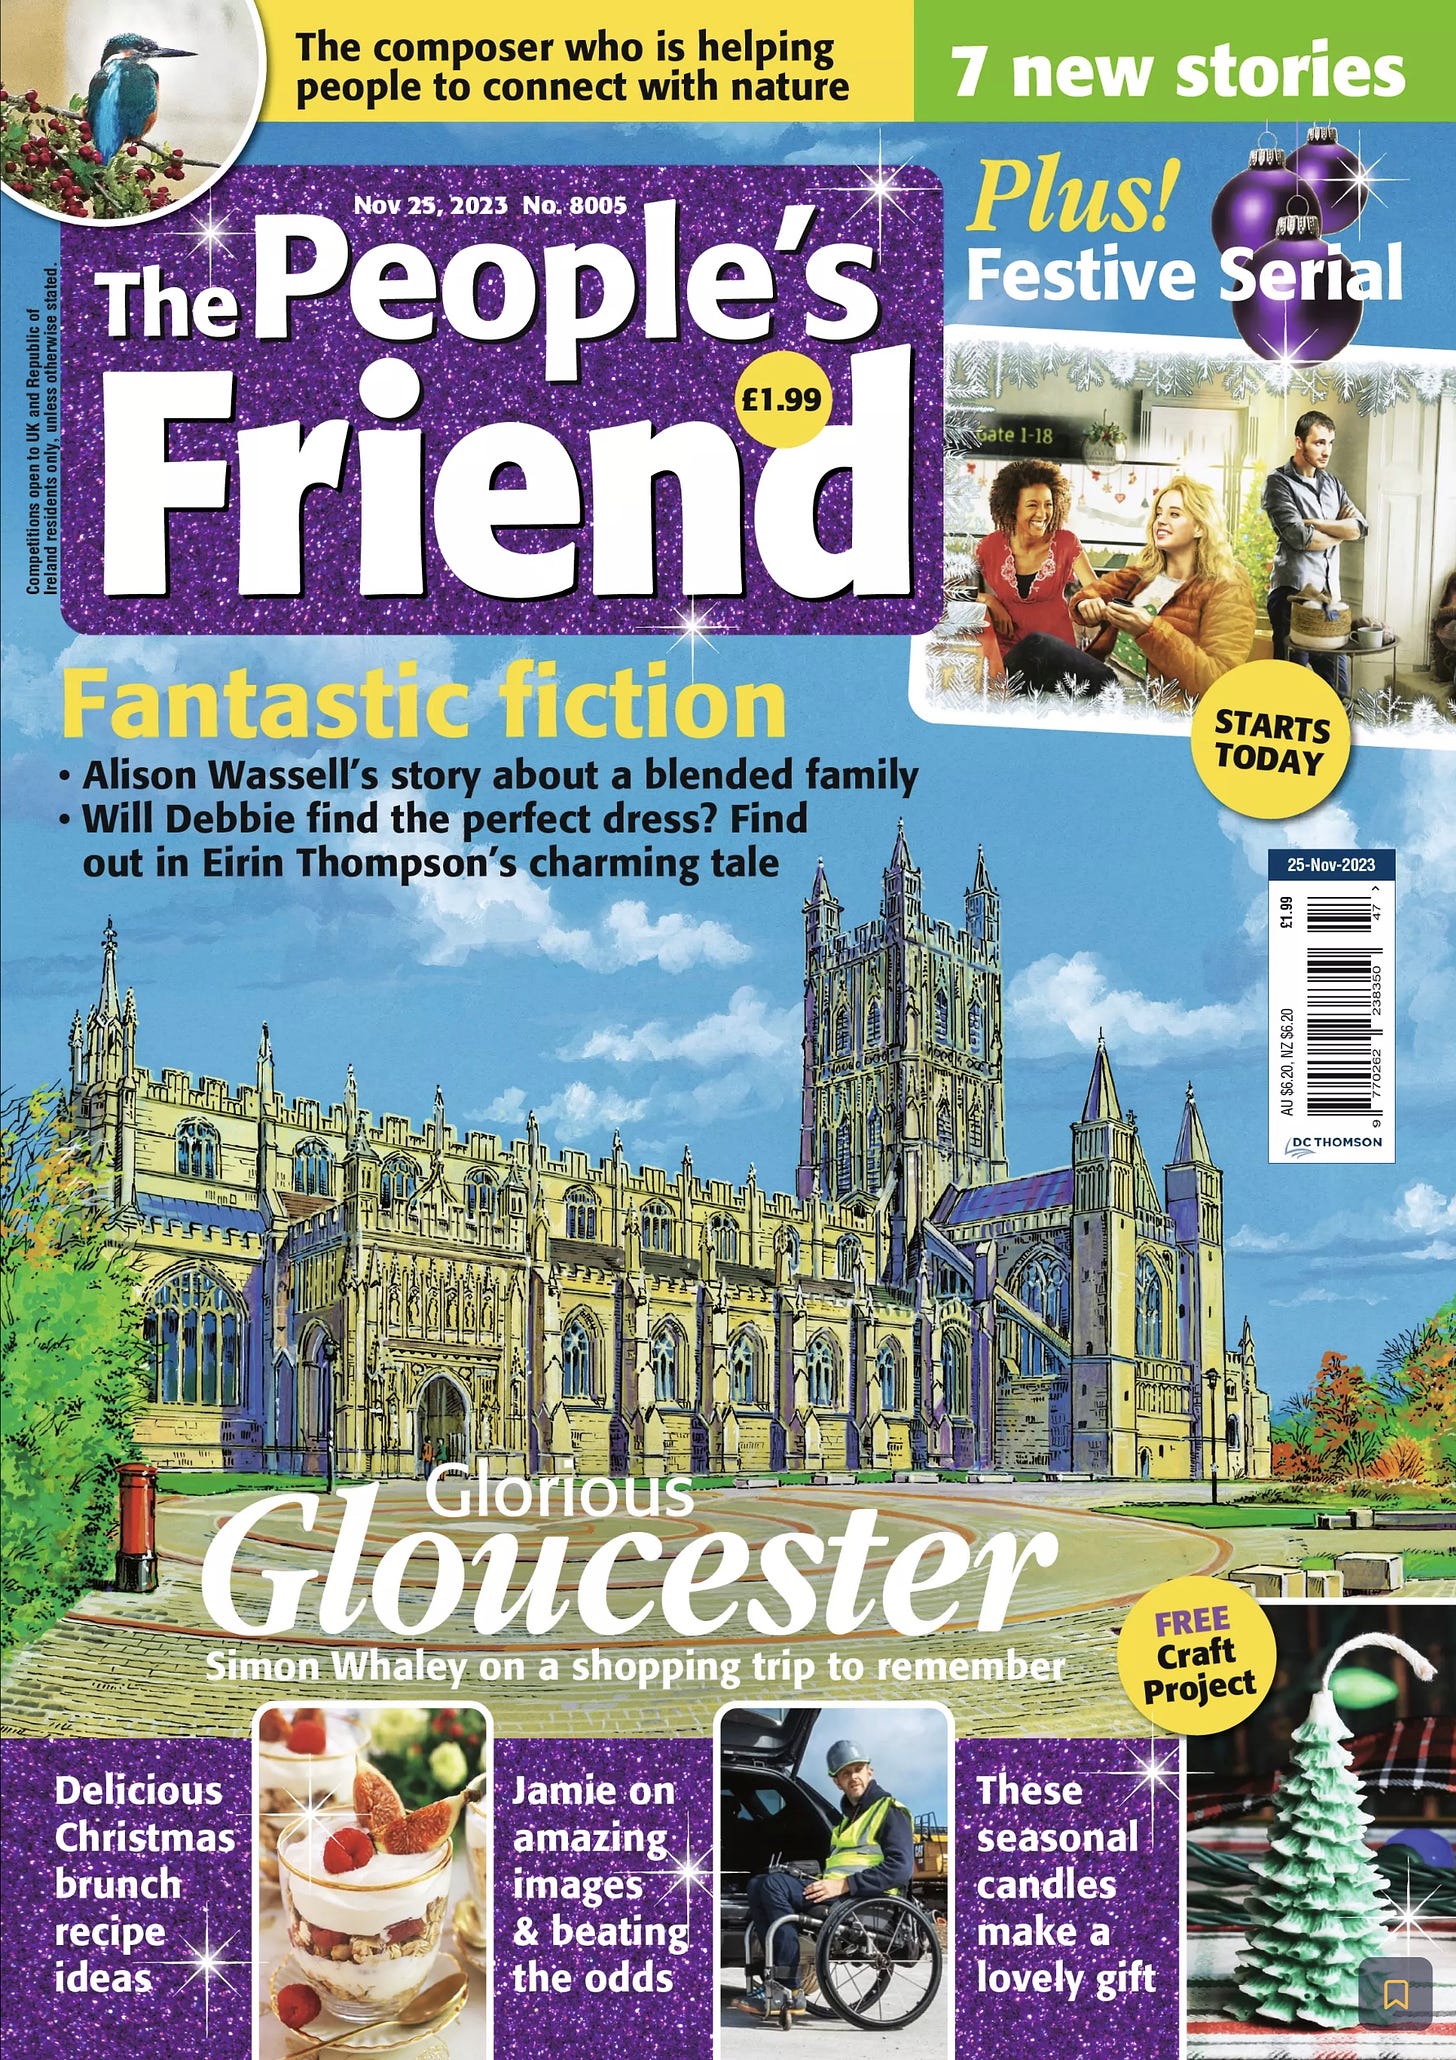 The front cover of the People's Friend magazine with an image of Gloucester Cathedral dominating the cover.